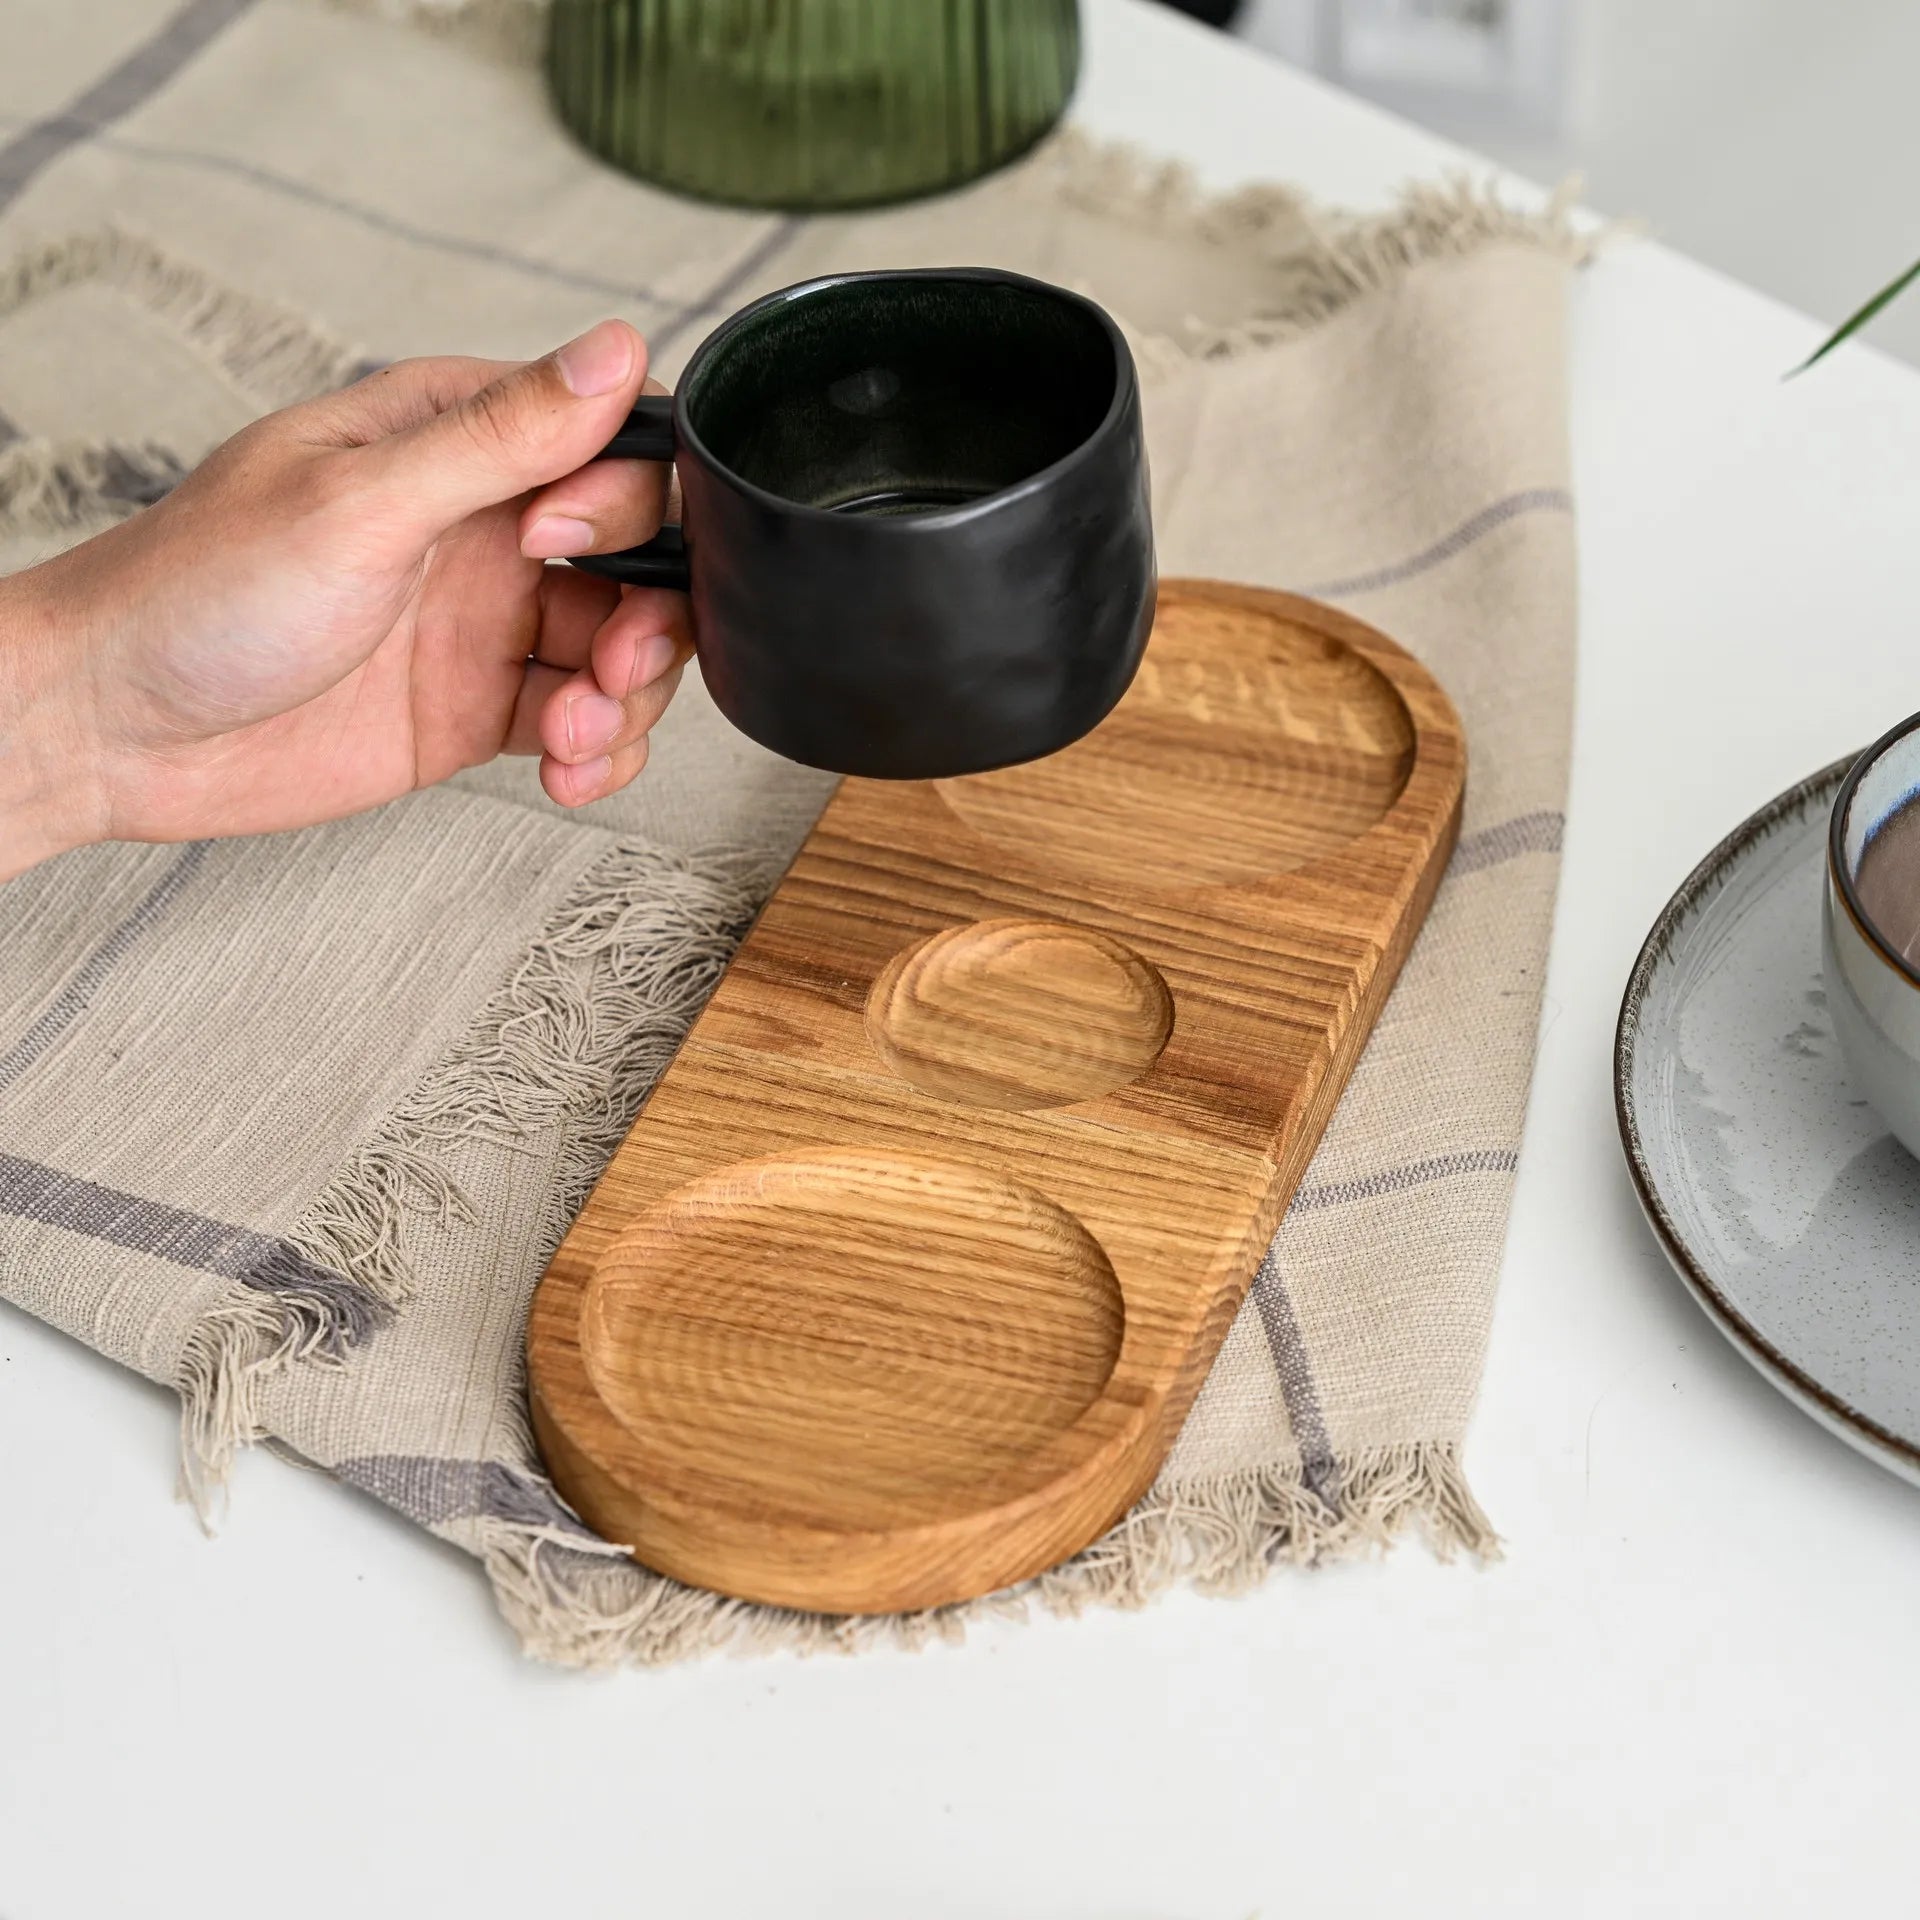 Personalized tray for restaurants, crafted from wood, adding a rustic charm to your dining service.